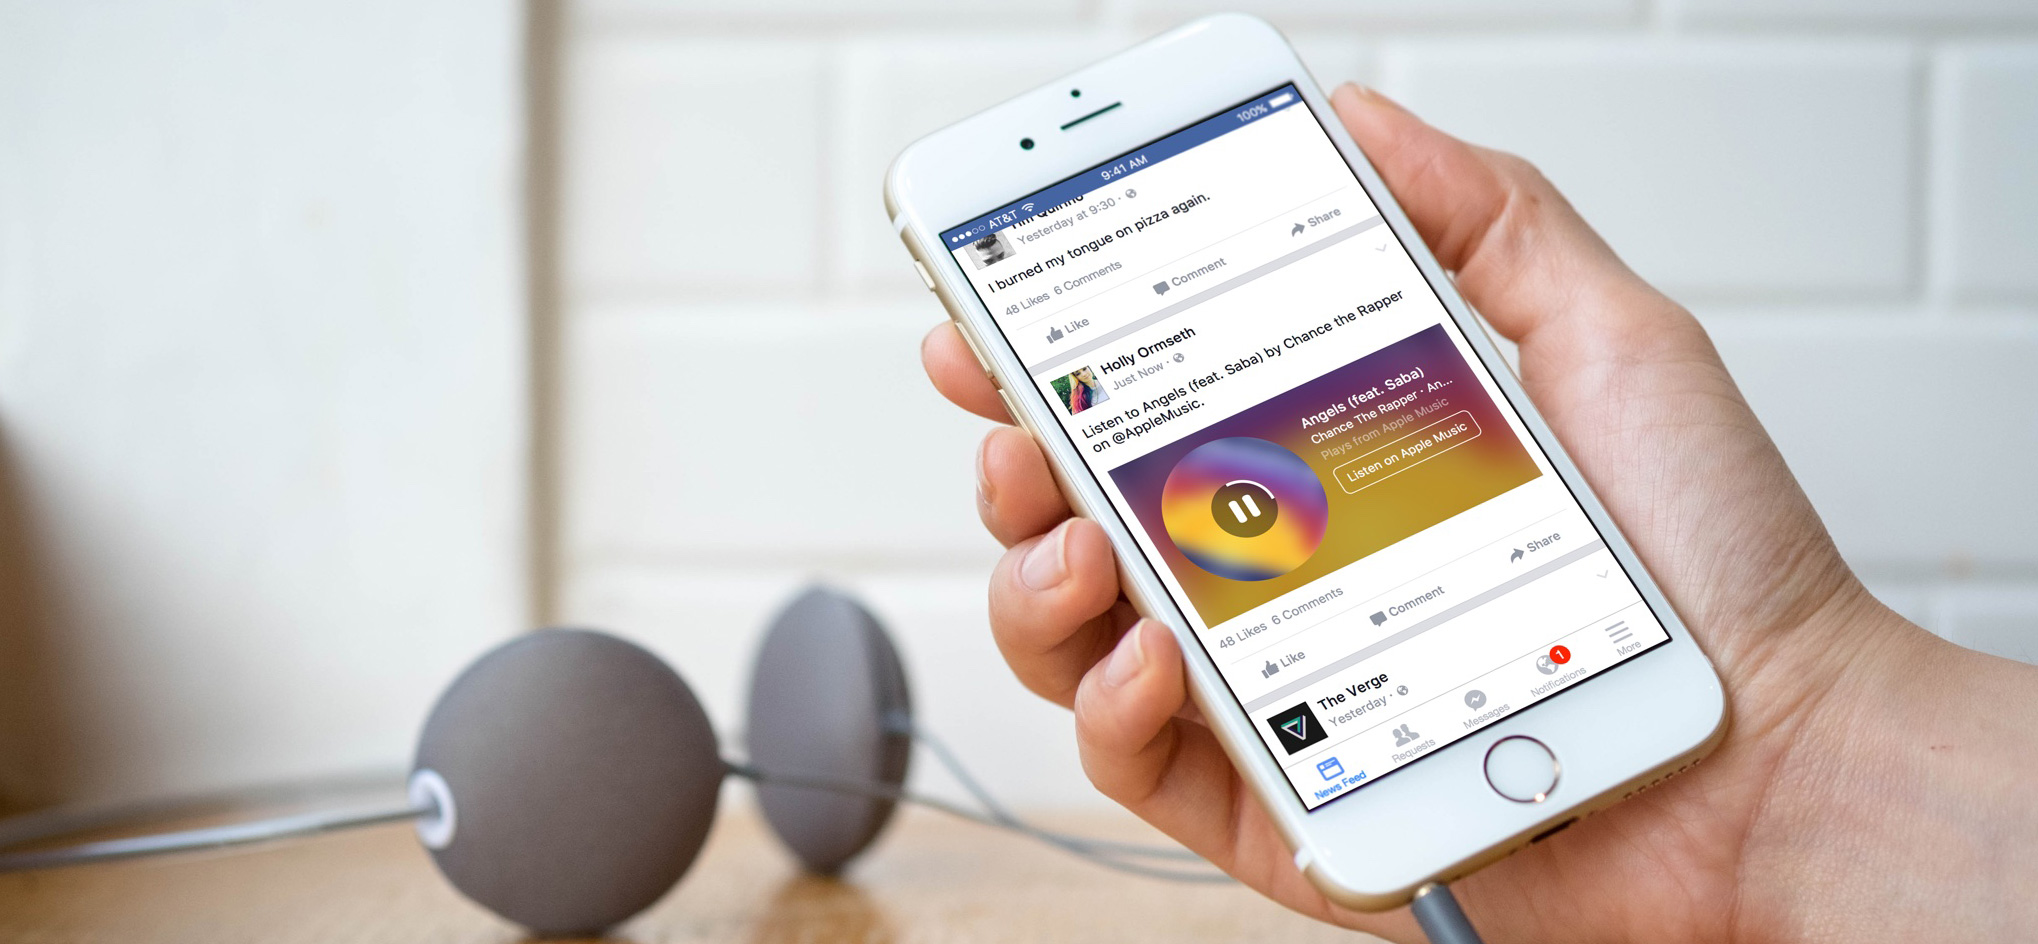 Will Facebook’s Music Stories feature lead to a streaming service?